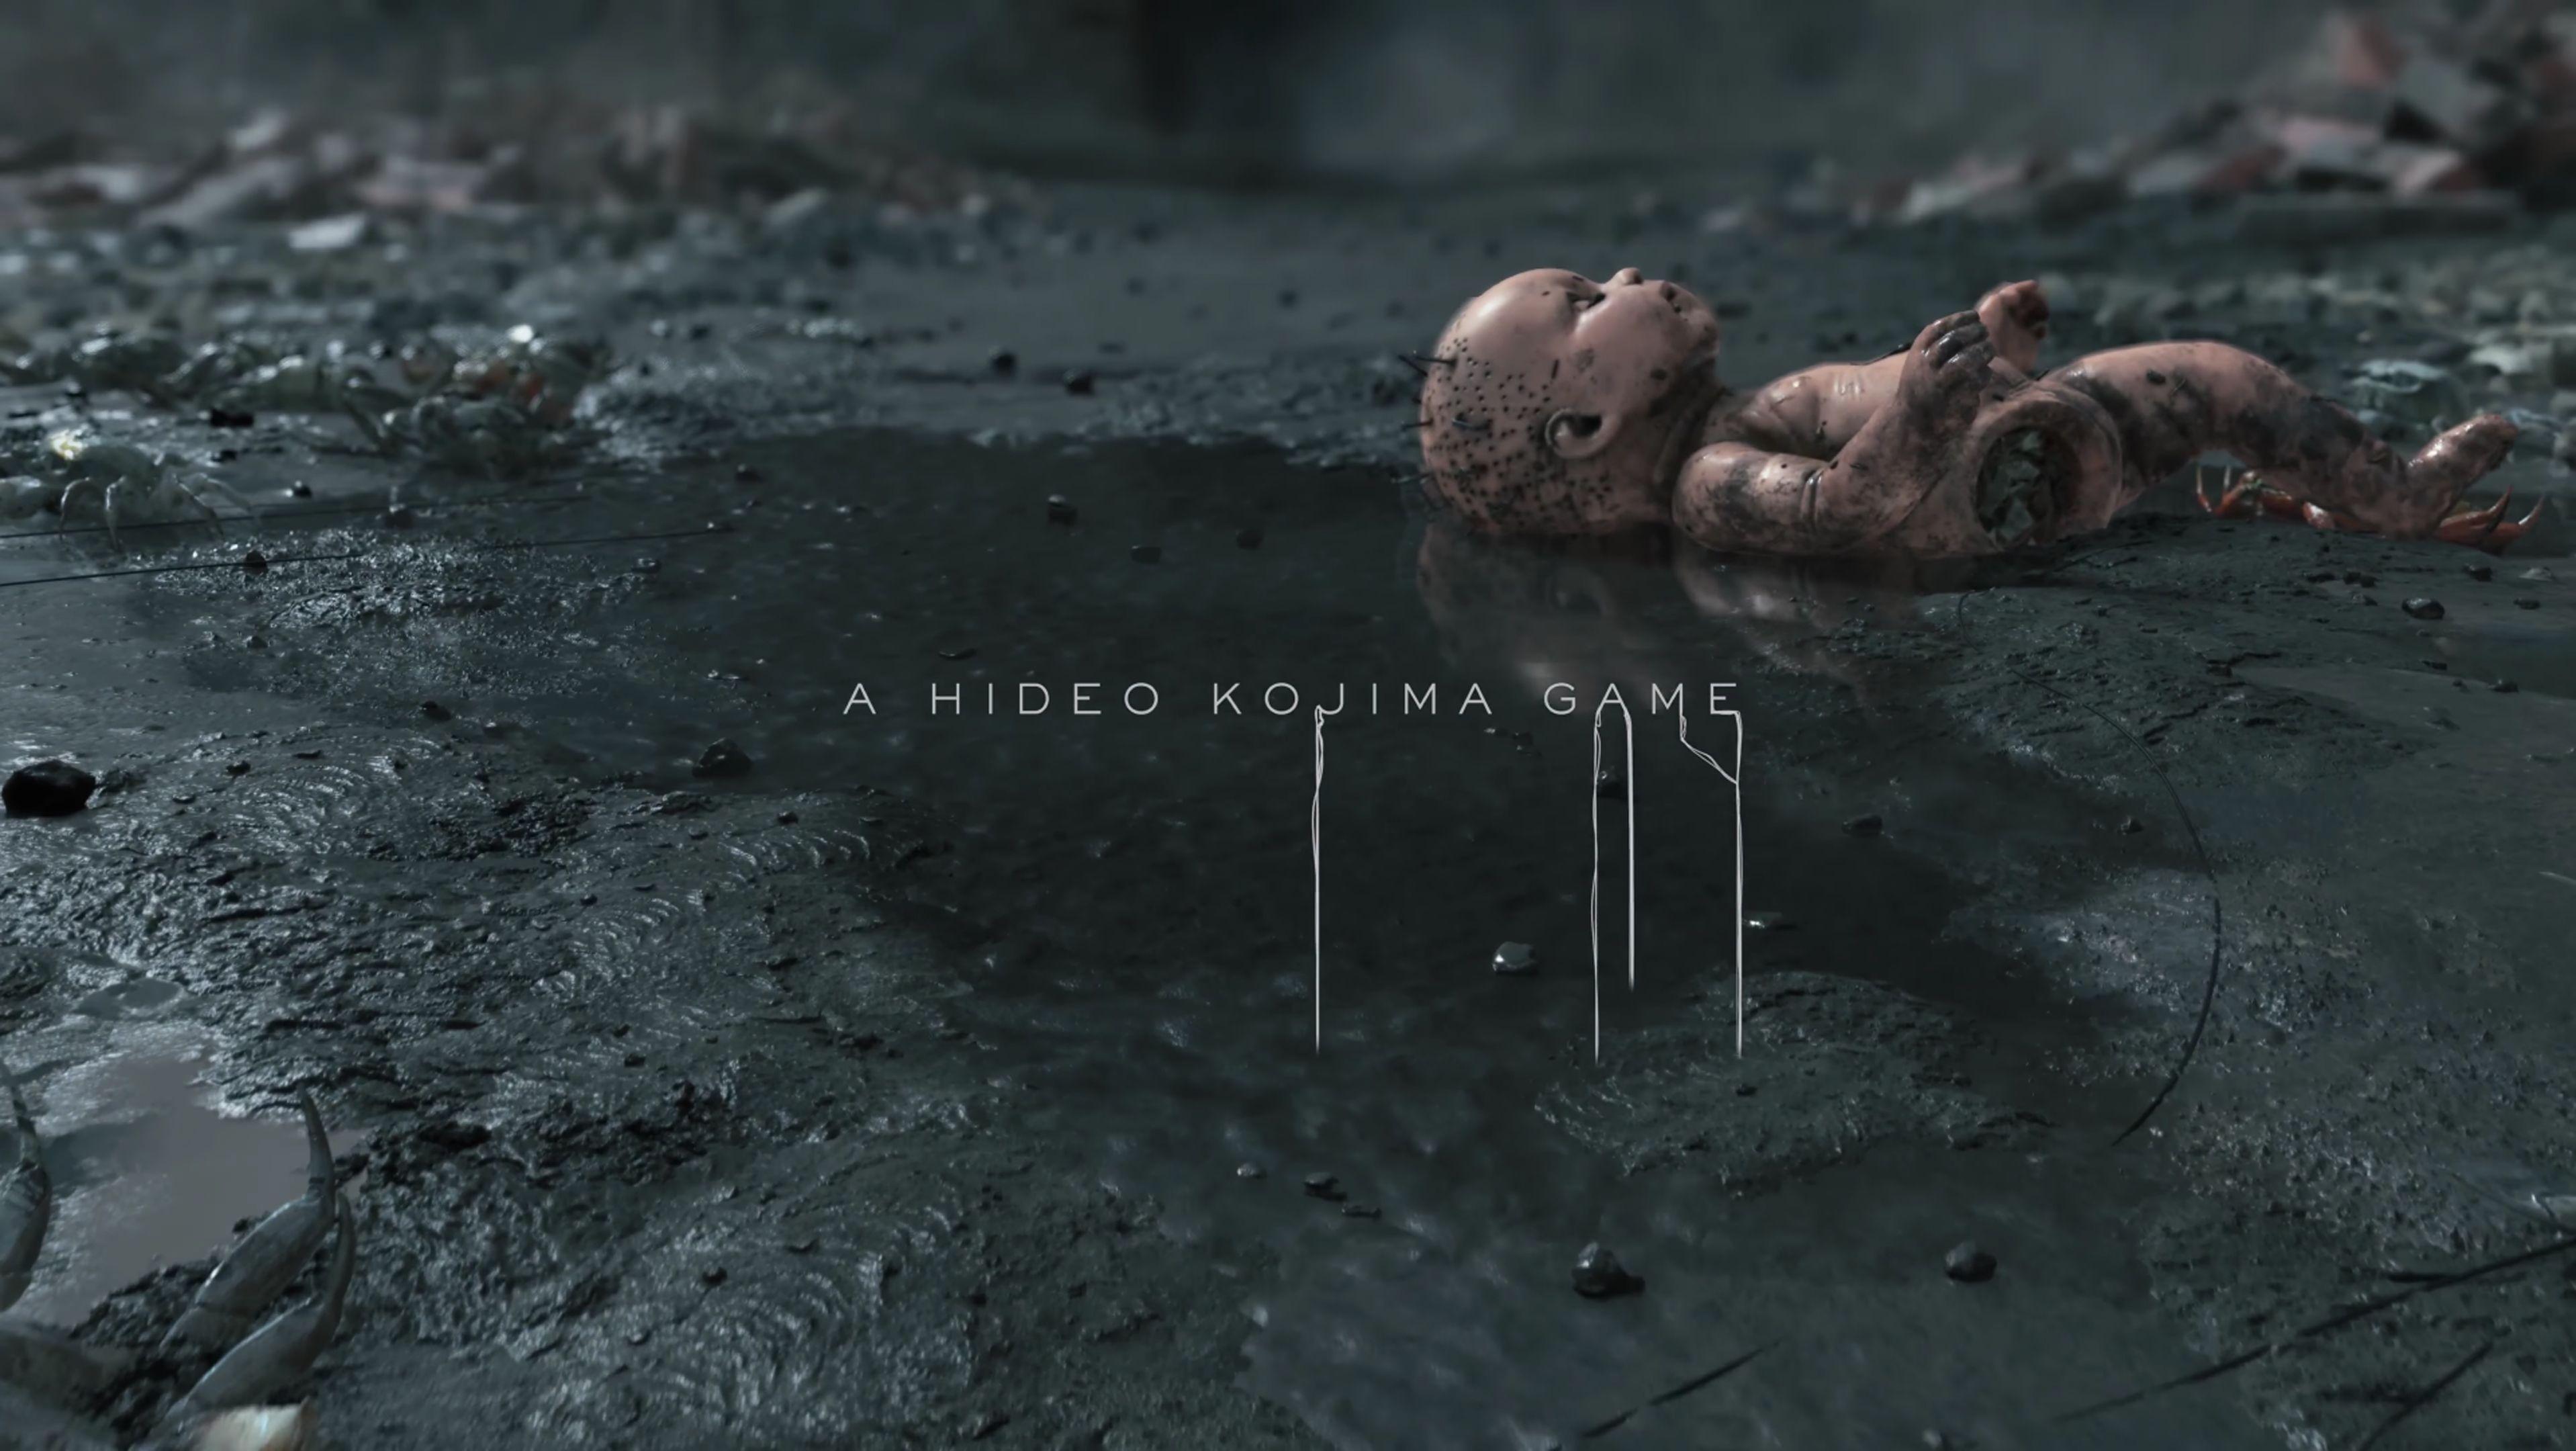 4K HD Death Stranding Wallpaper You Need to Make Your